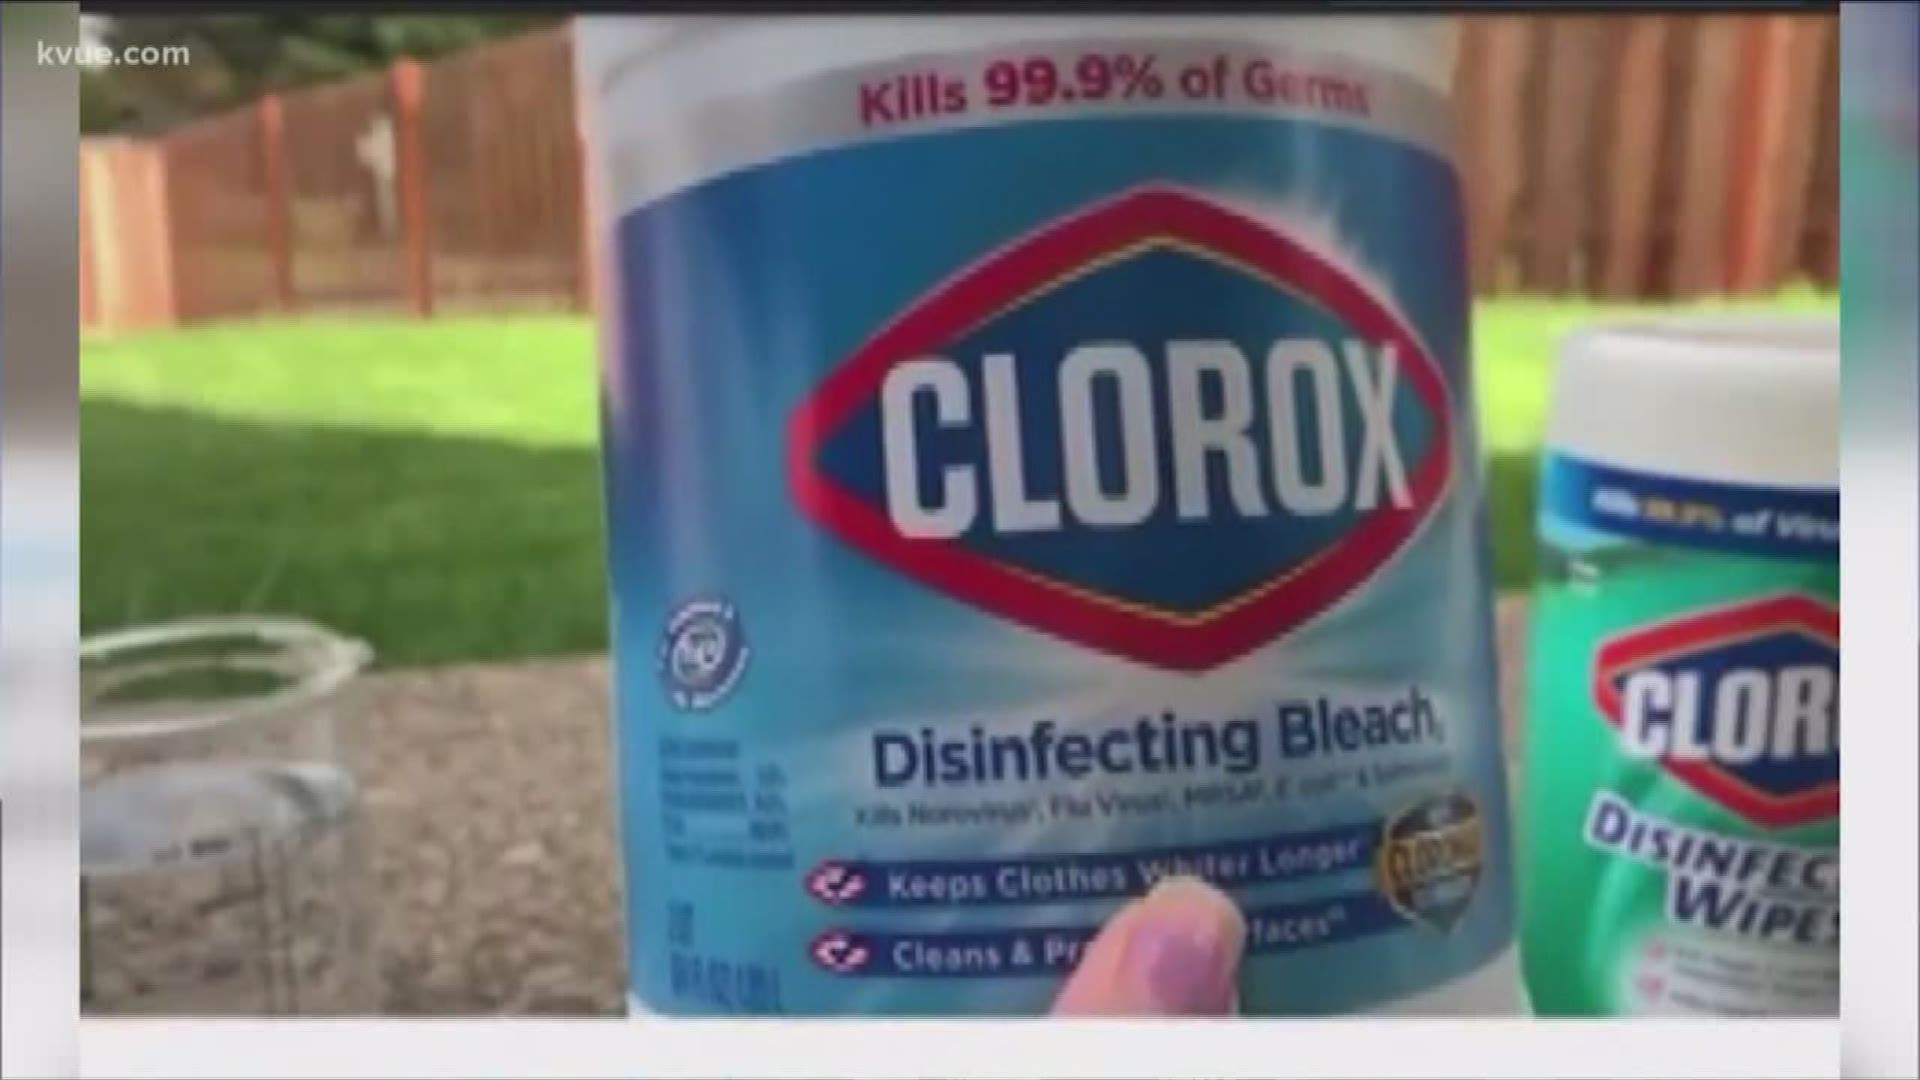 Austin emergency room doctors are urging people not to consume bleach to fight COVID-19.